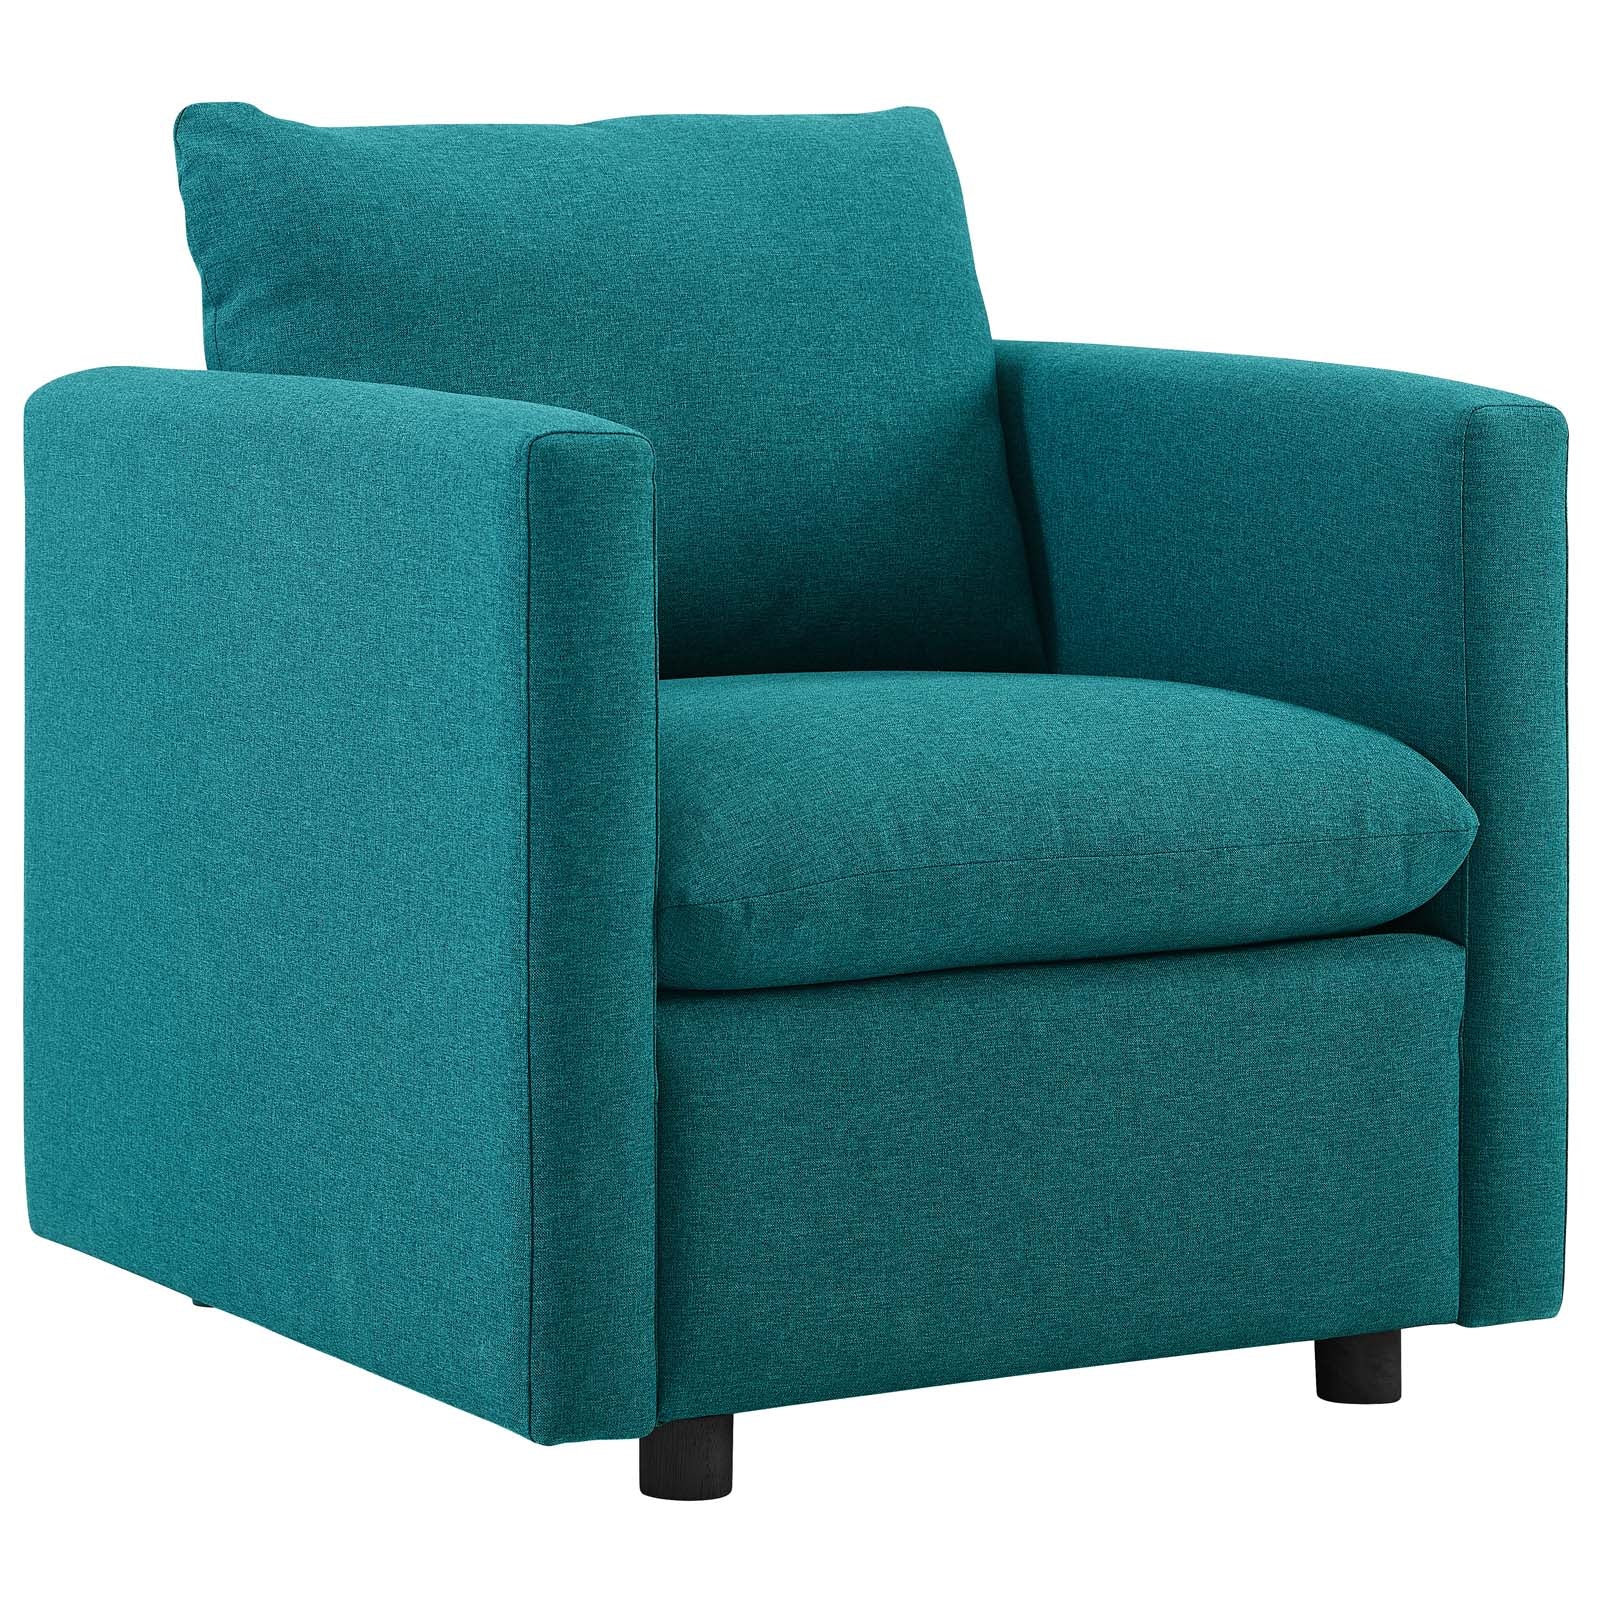 Activate Upholstered Fabric Sofa and Armchair Set